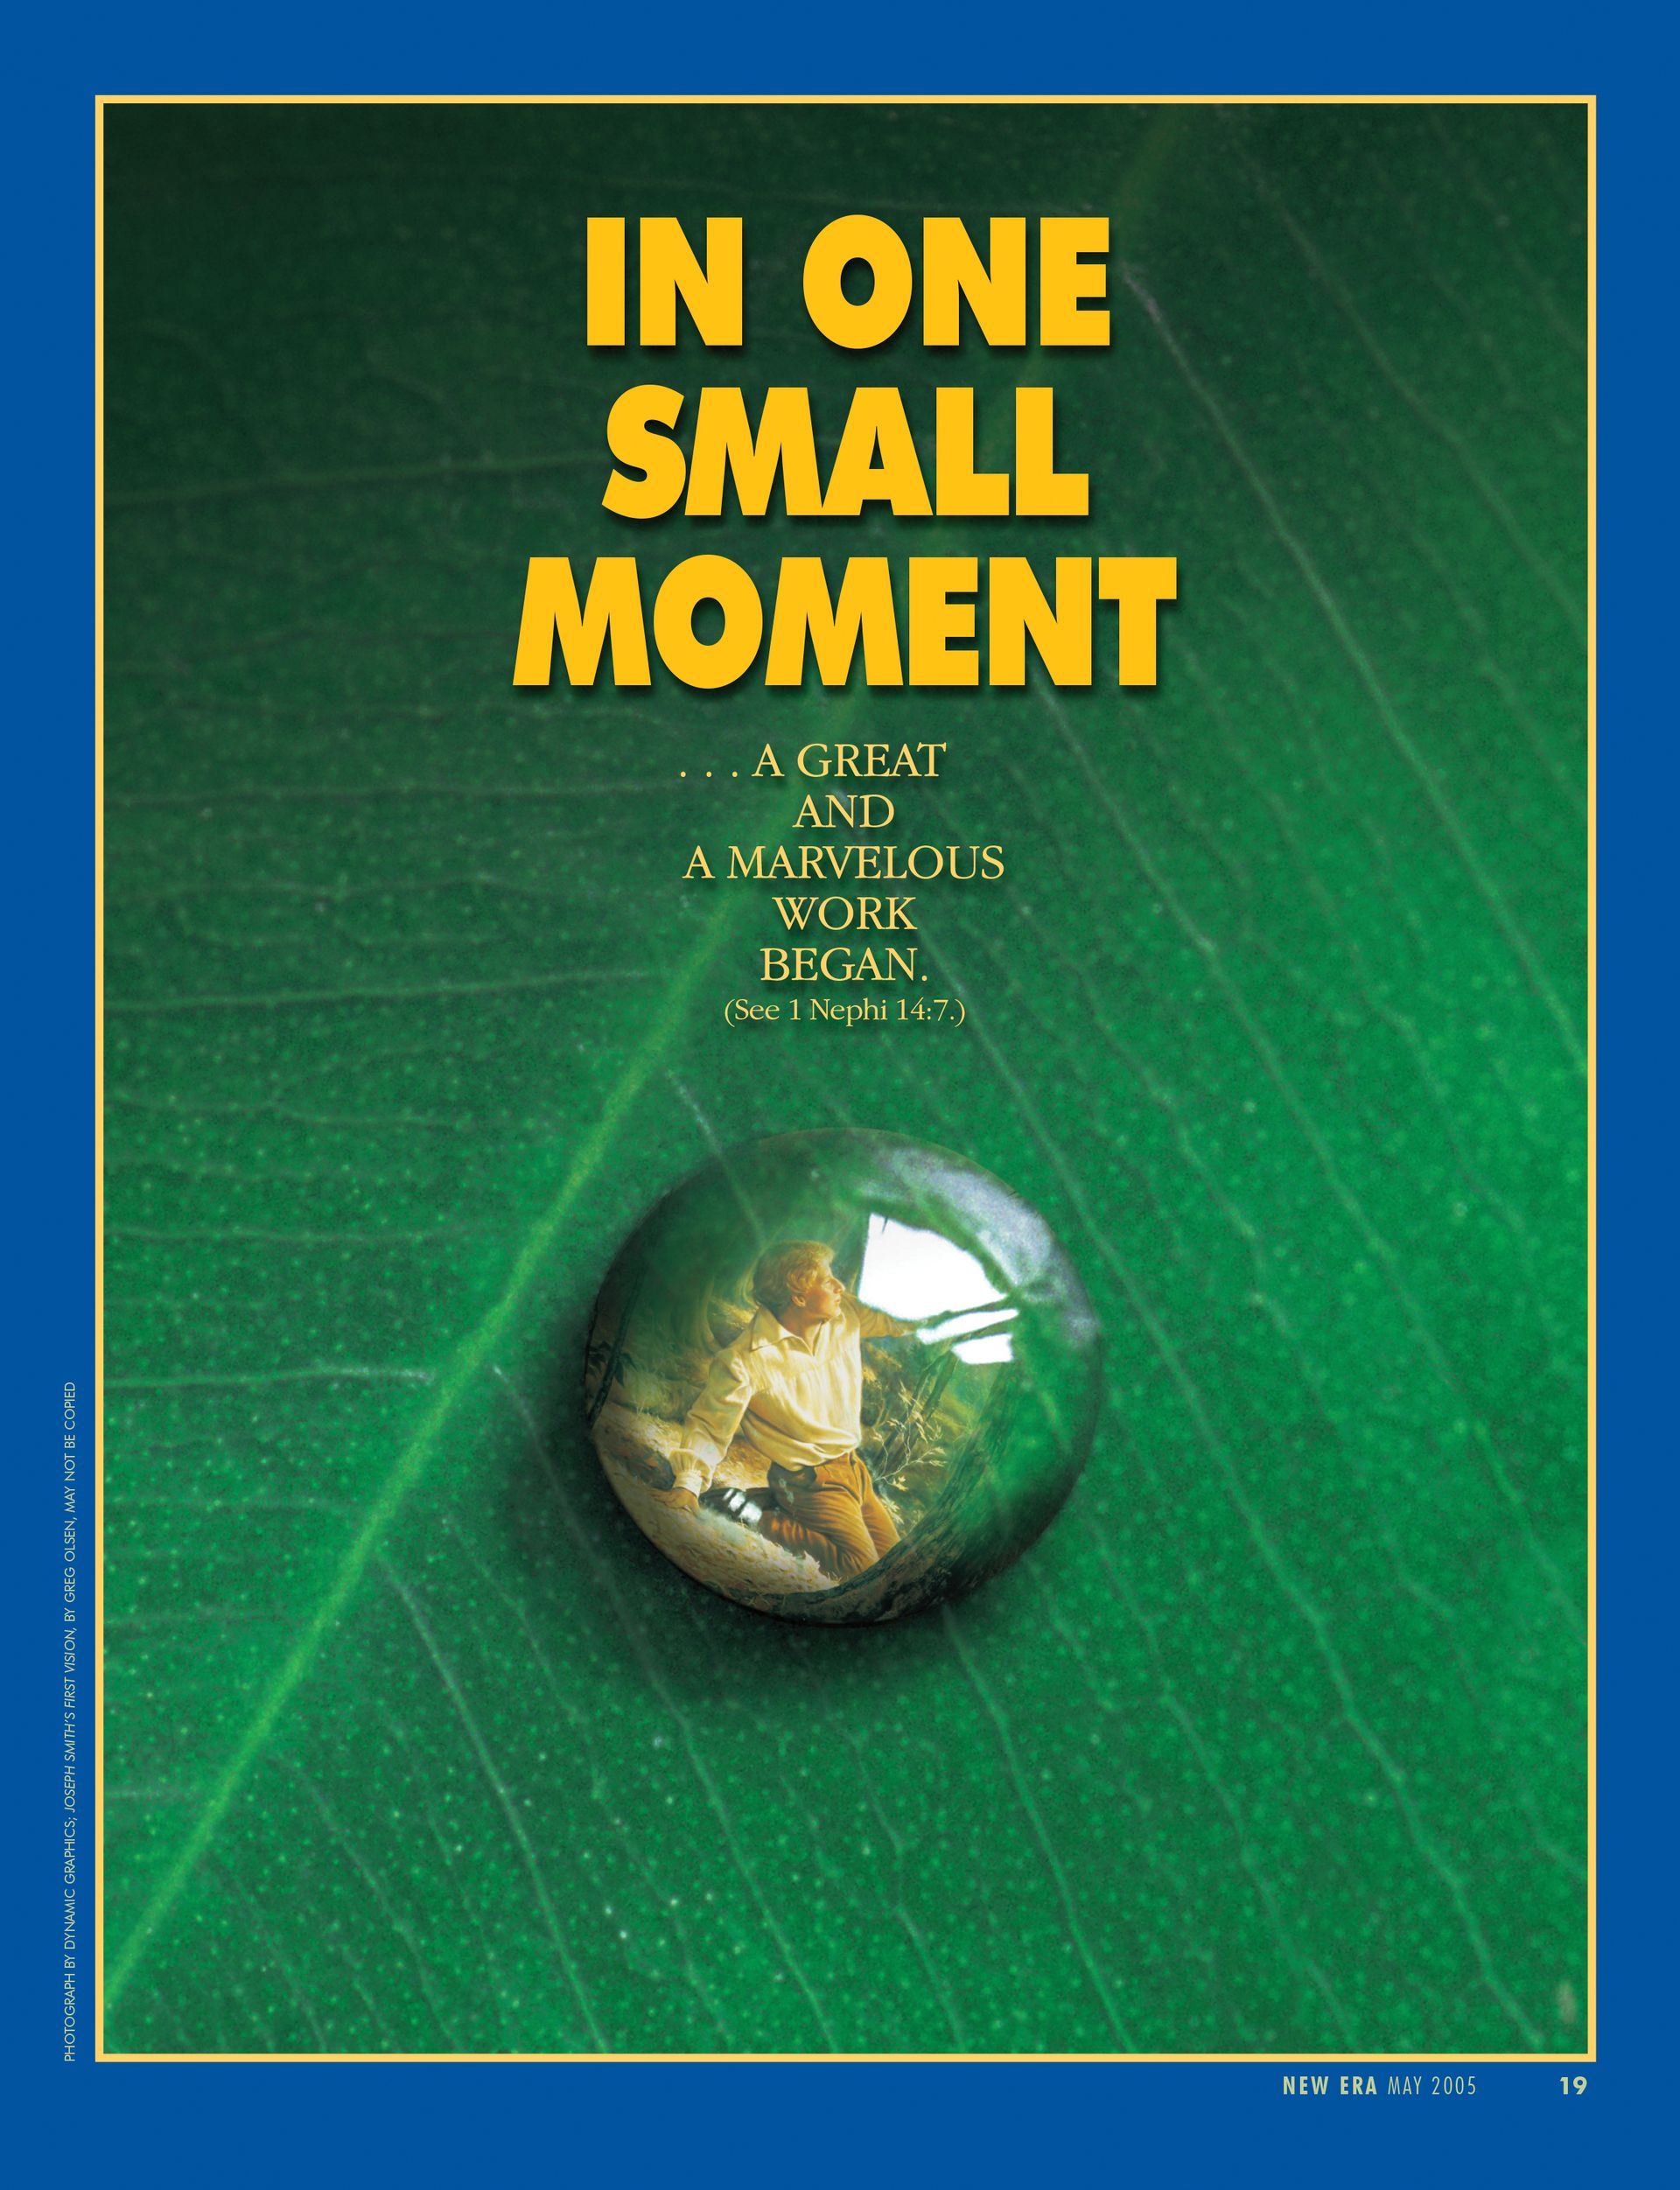 In One Small Moment … a great and a marvelous work began. (See 1 Nephi 14:7.) May 2005 © undefined ipCode 1.